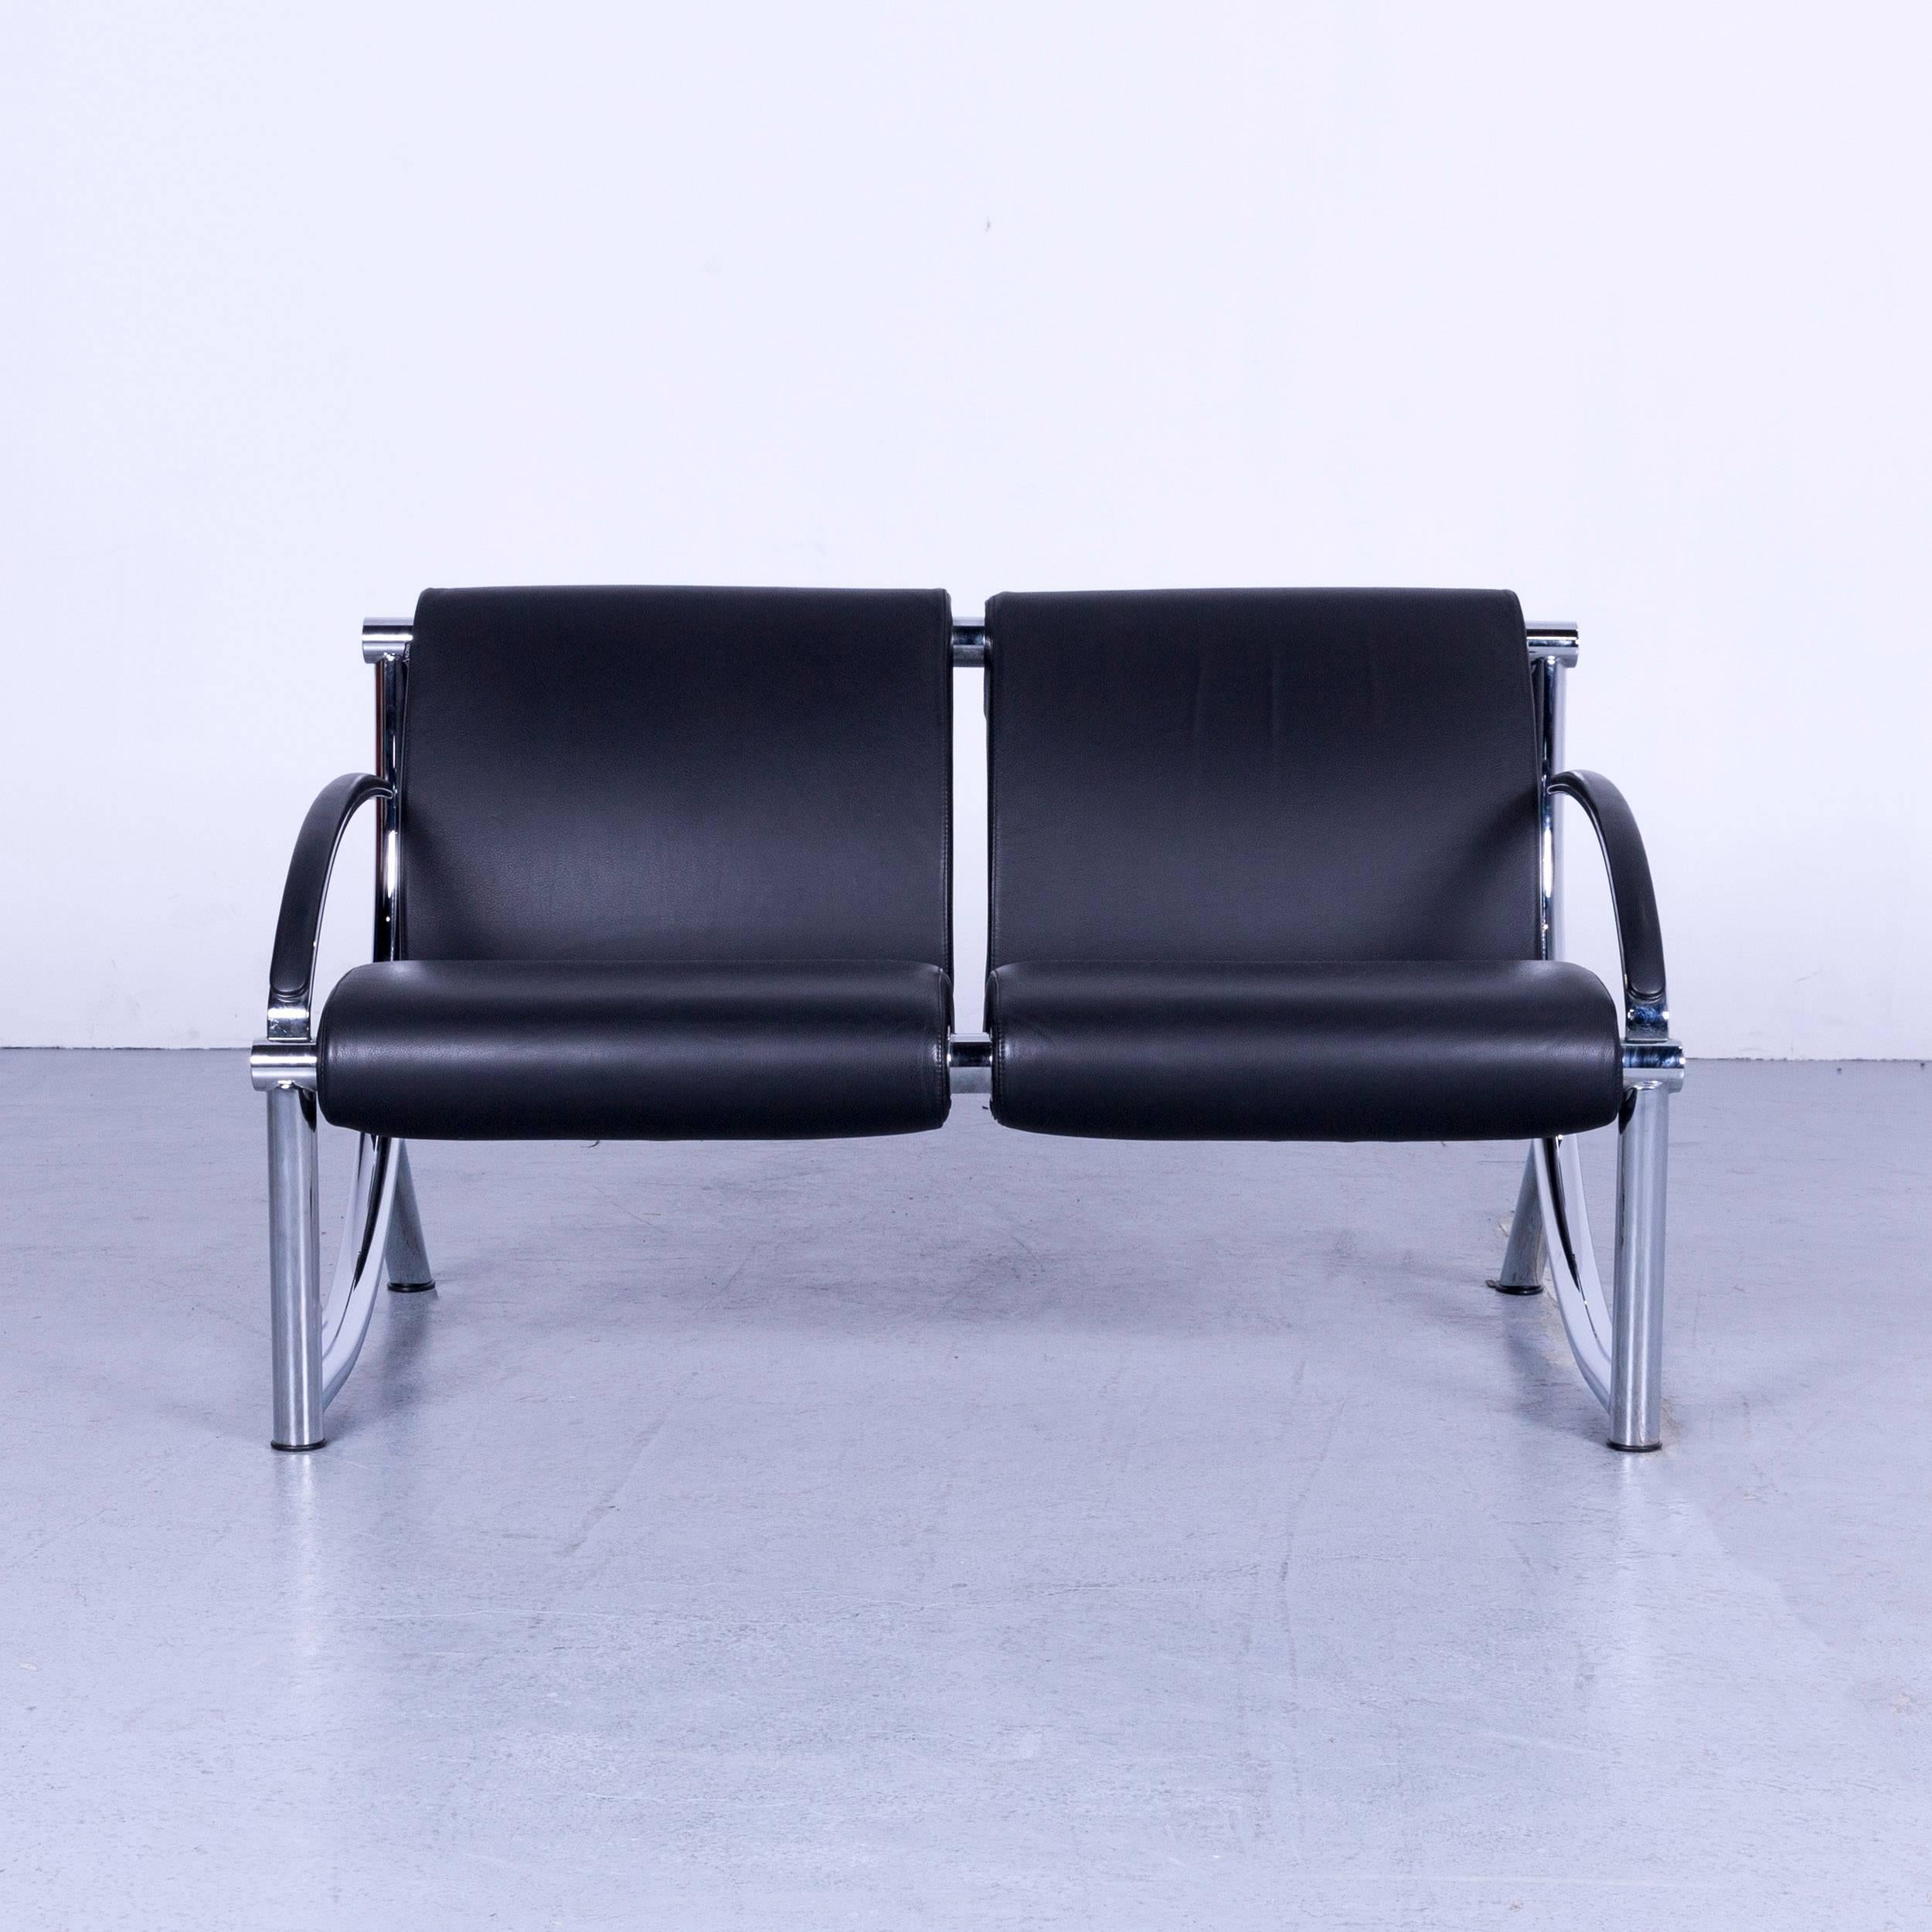 Klöber Tezett designer sofa in black leather with chrome frame made in Germany.